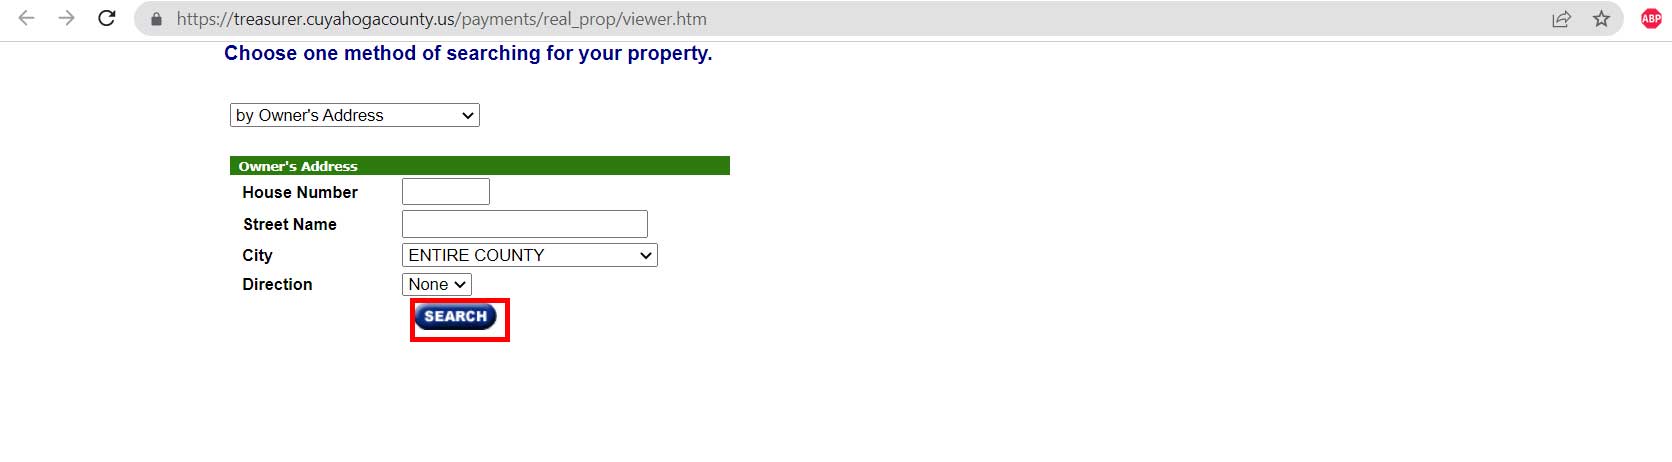 Cuyahoga Property Tax Search